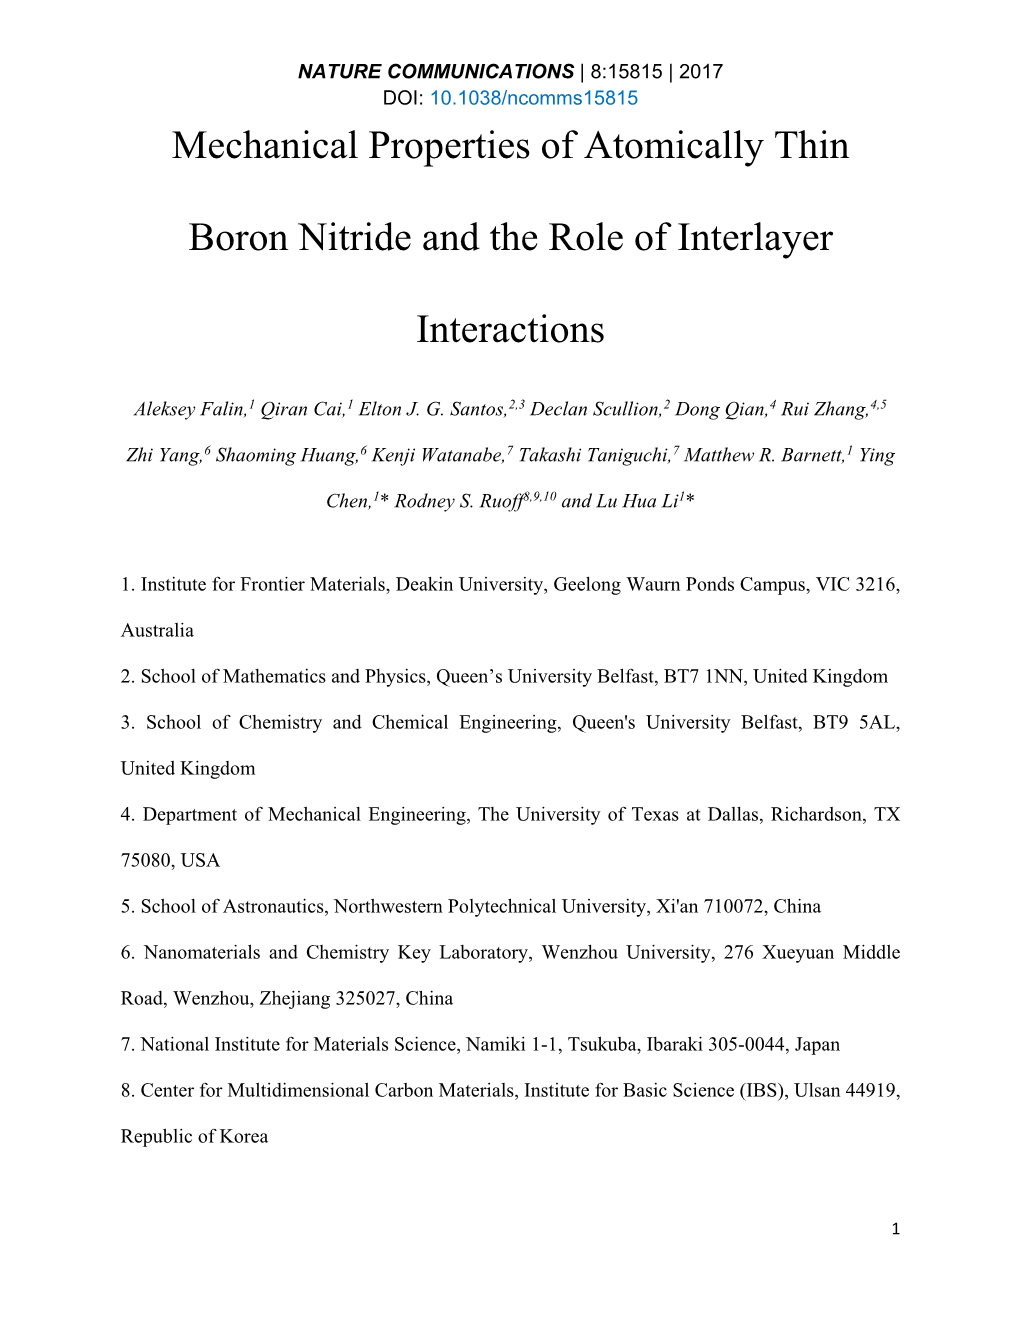 Mechanical Properties of Atomically Thin Boron Nitride and the Role Of